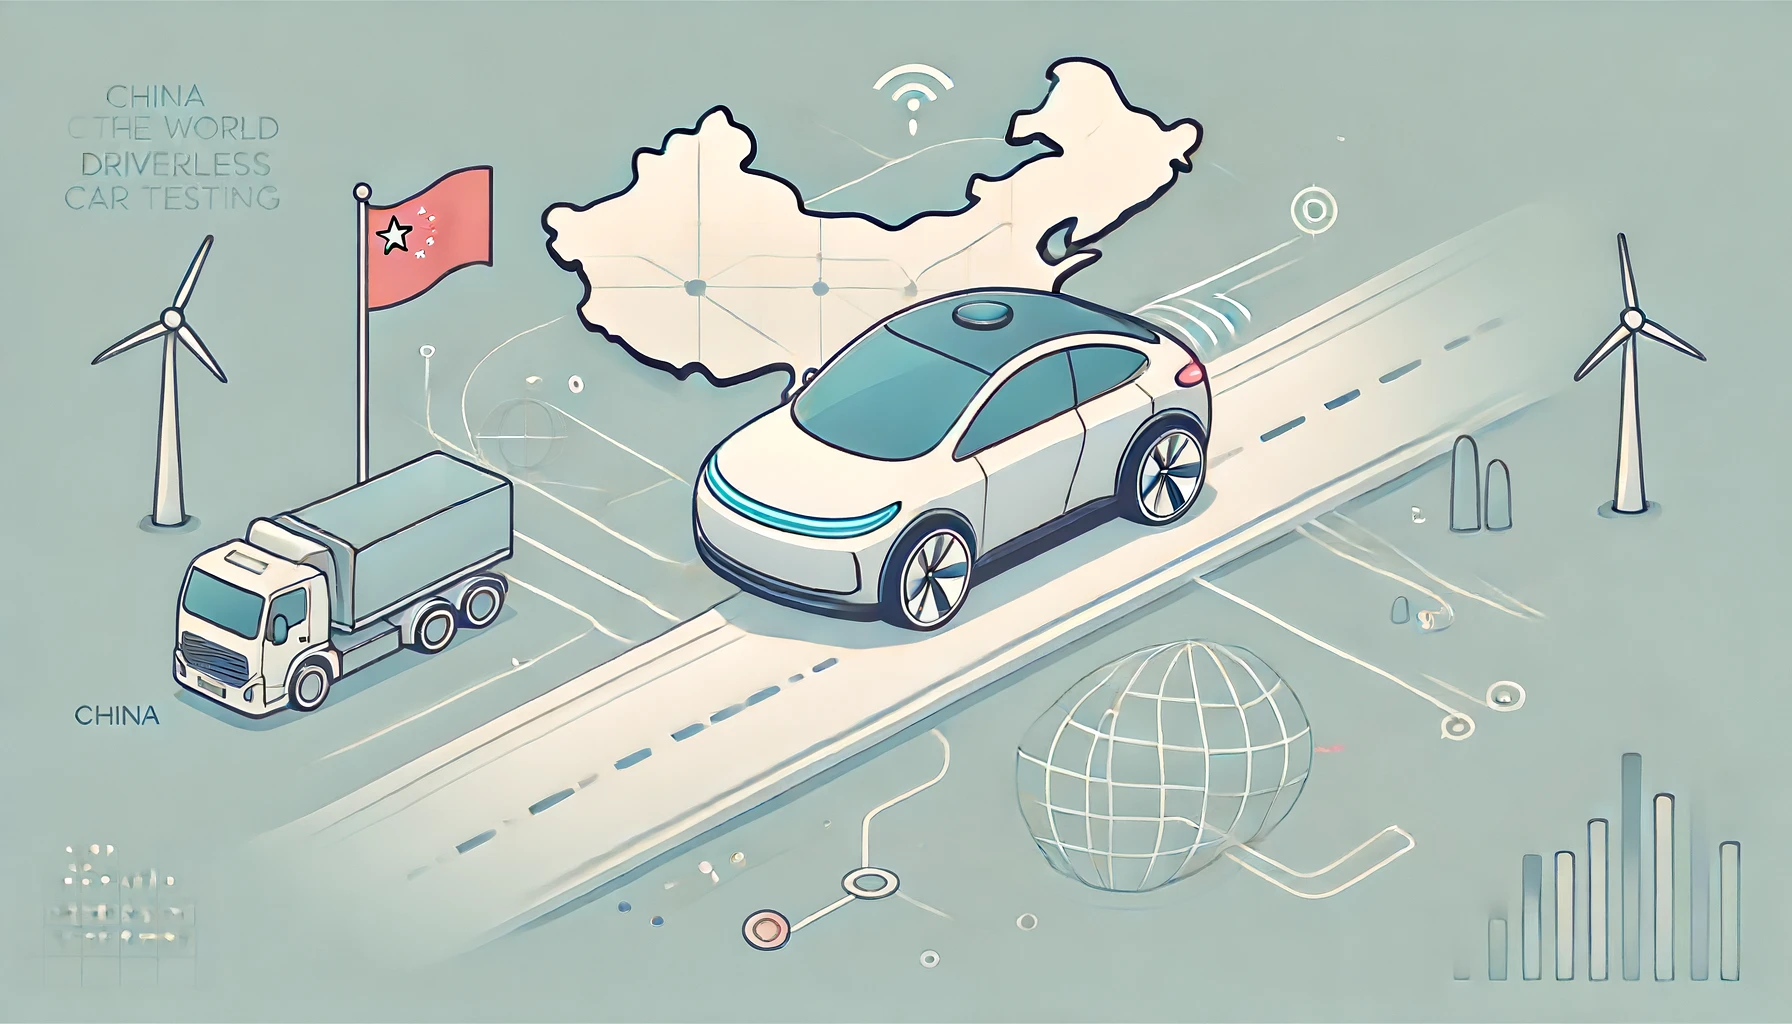 China tops the world in driverless car testing